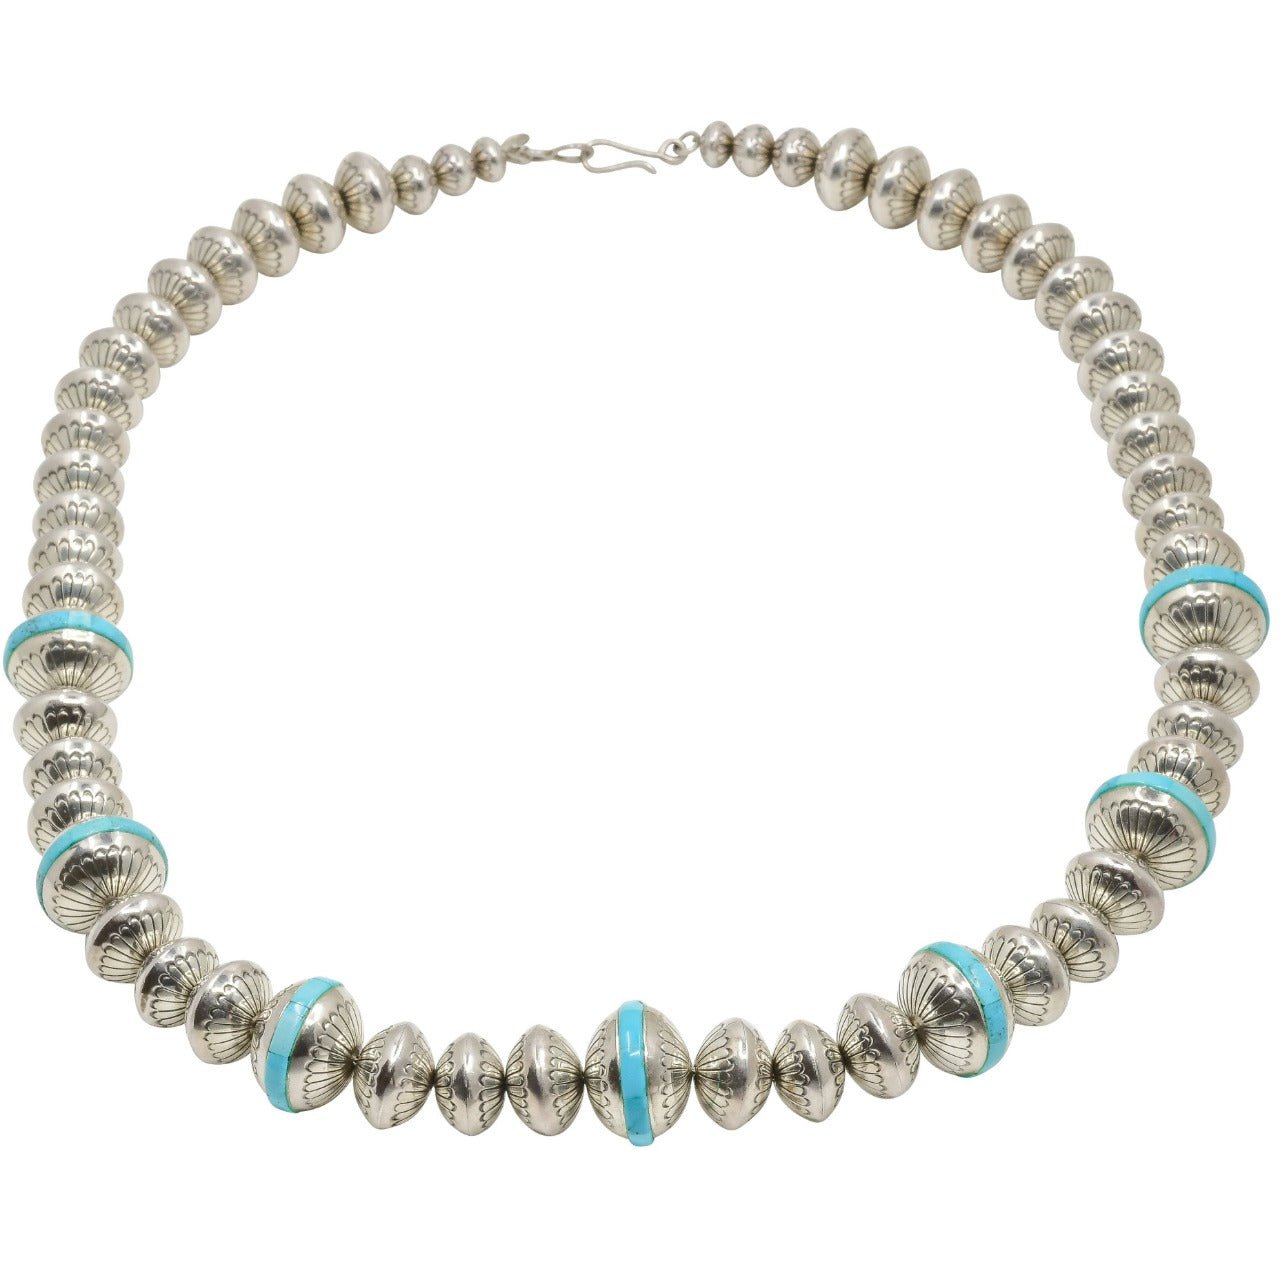 Mary Marie Lincoln Yazzie Silver Beads With Turquoise Inlay - Turquoise & Tufa